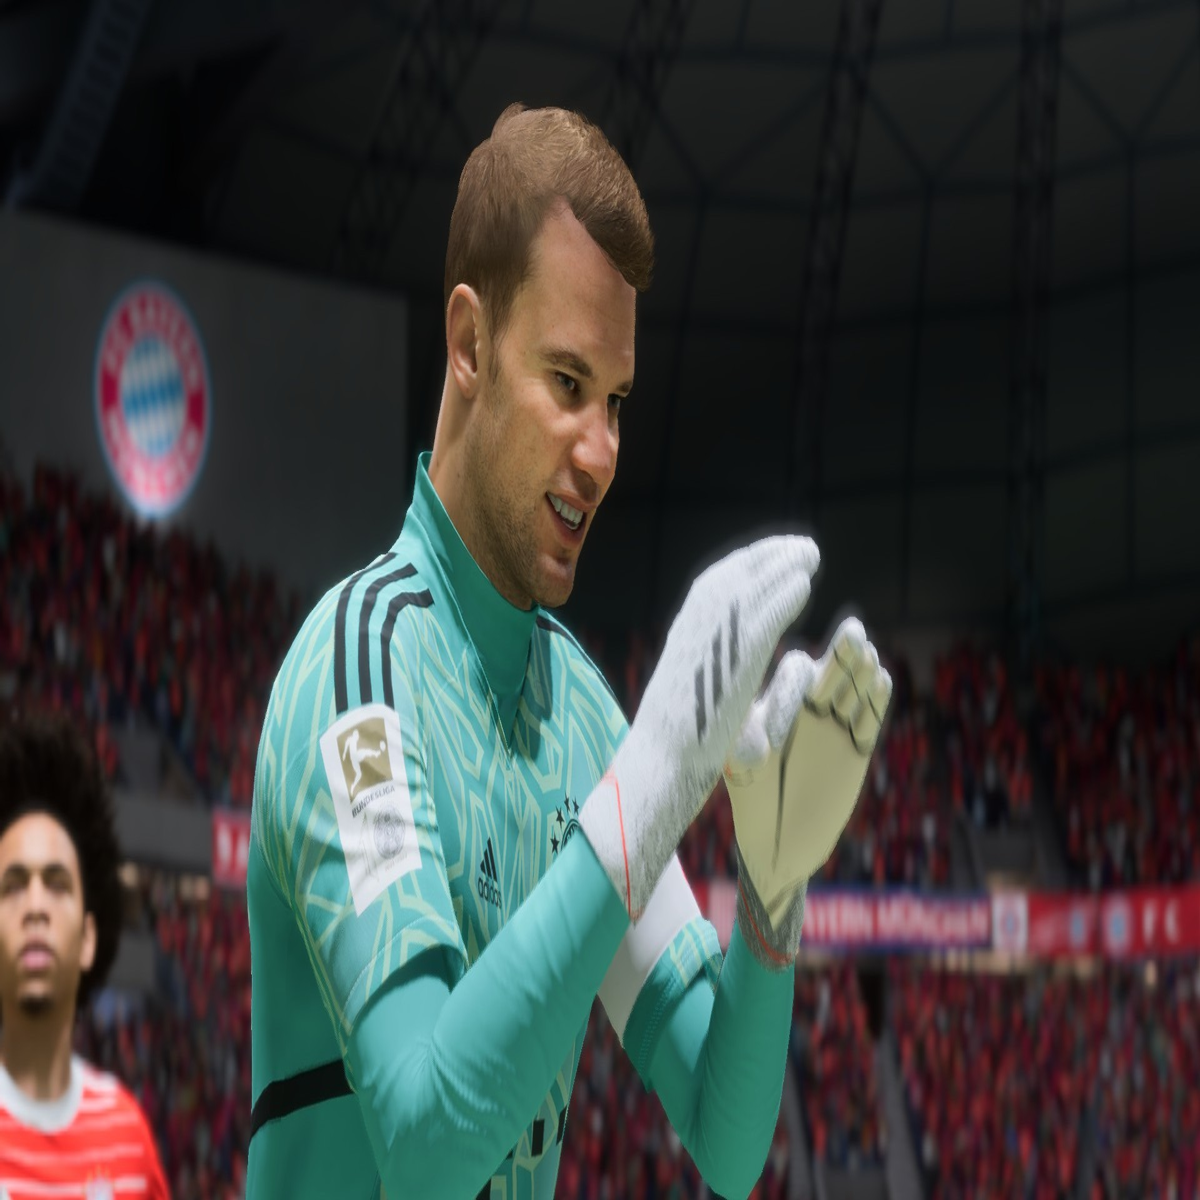 FIFA 23 Ultimate Team best goalkeepers: Cheap & meta players